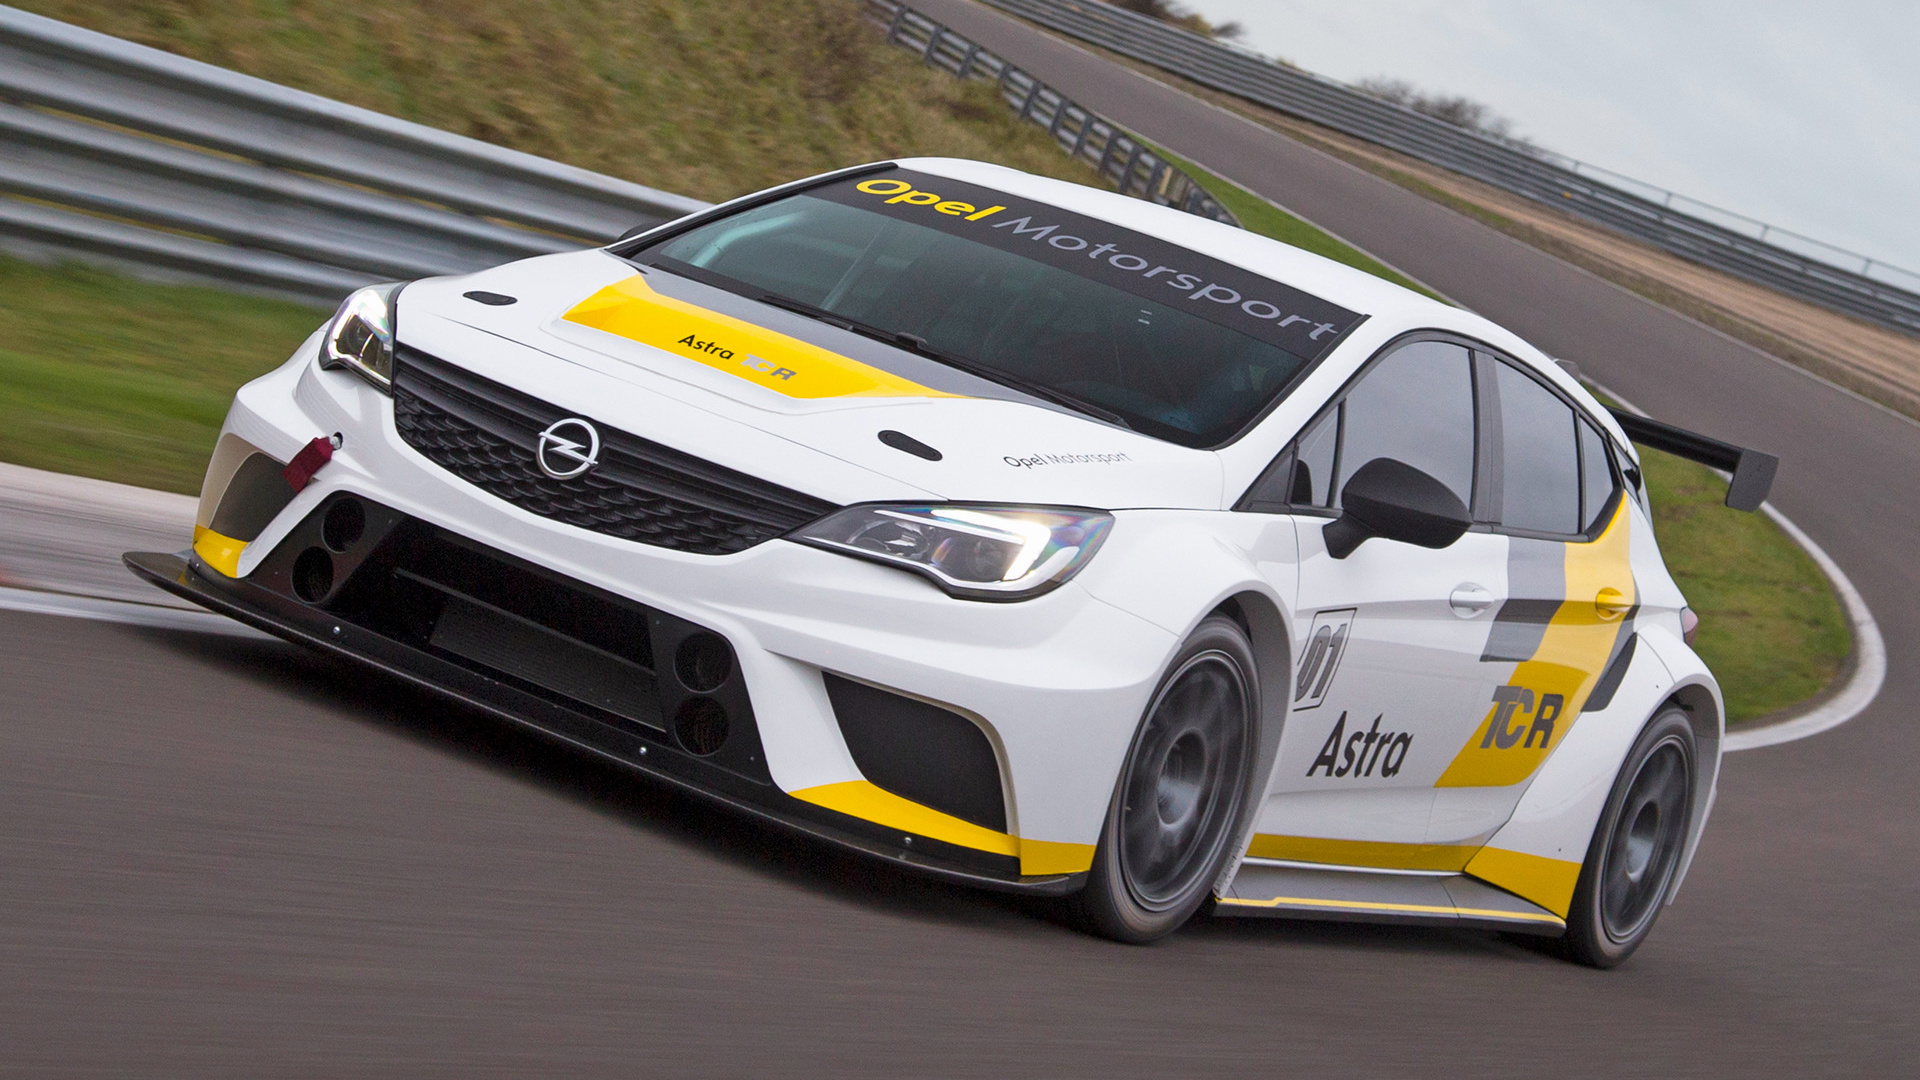 2016 Opel Astra TCR